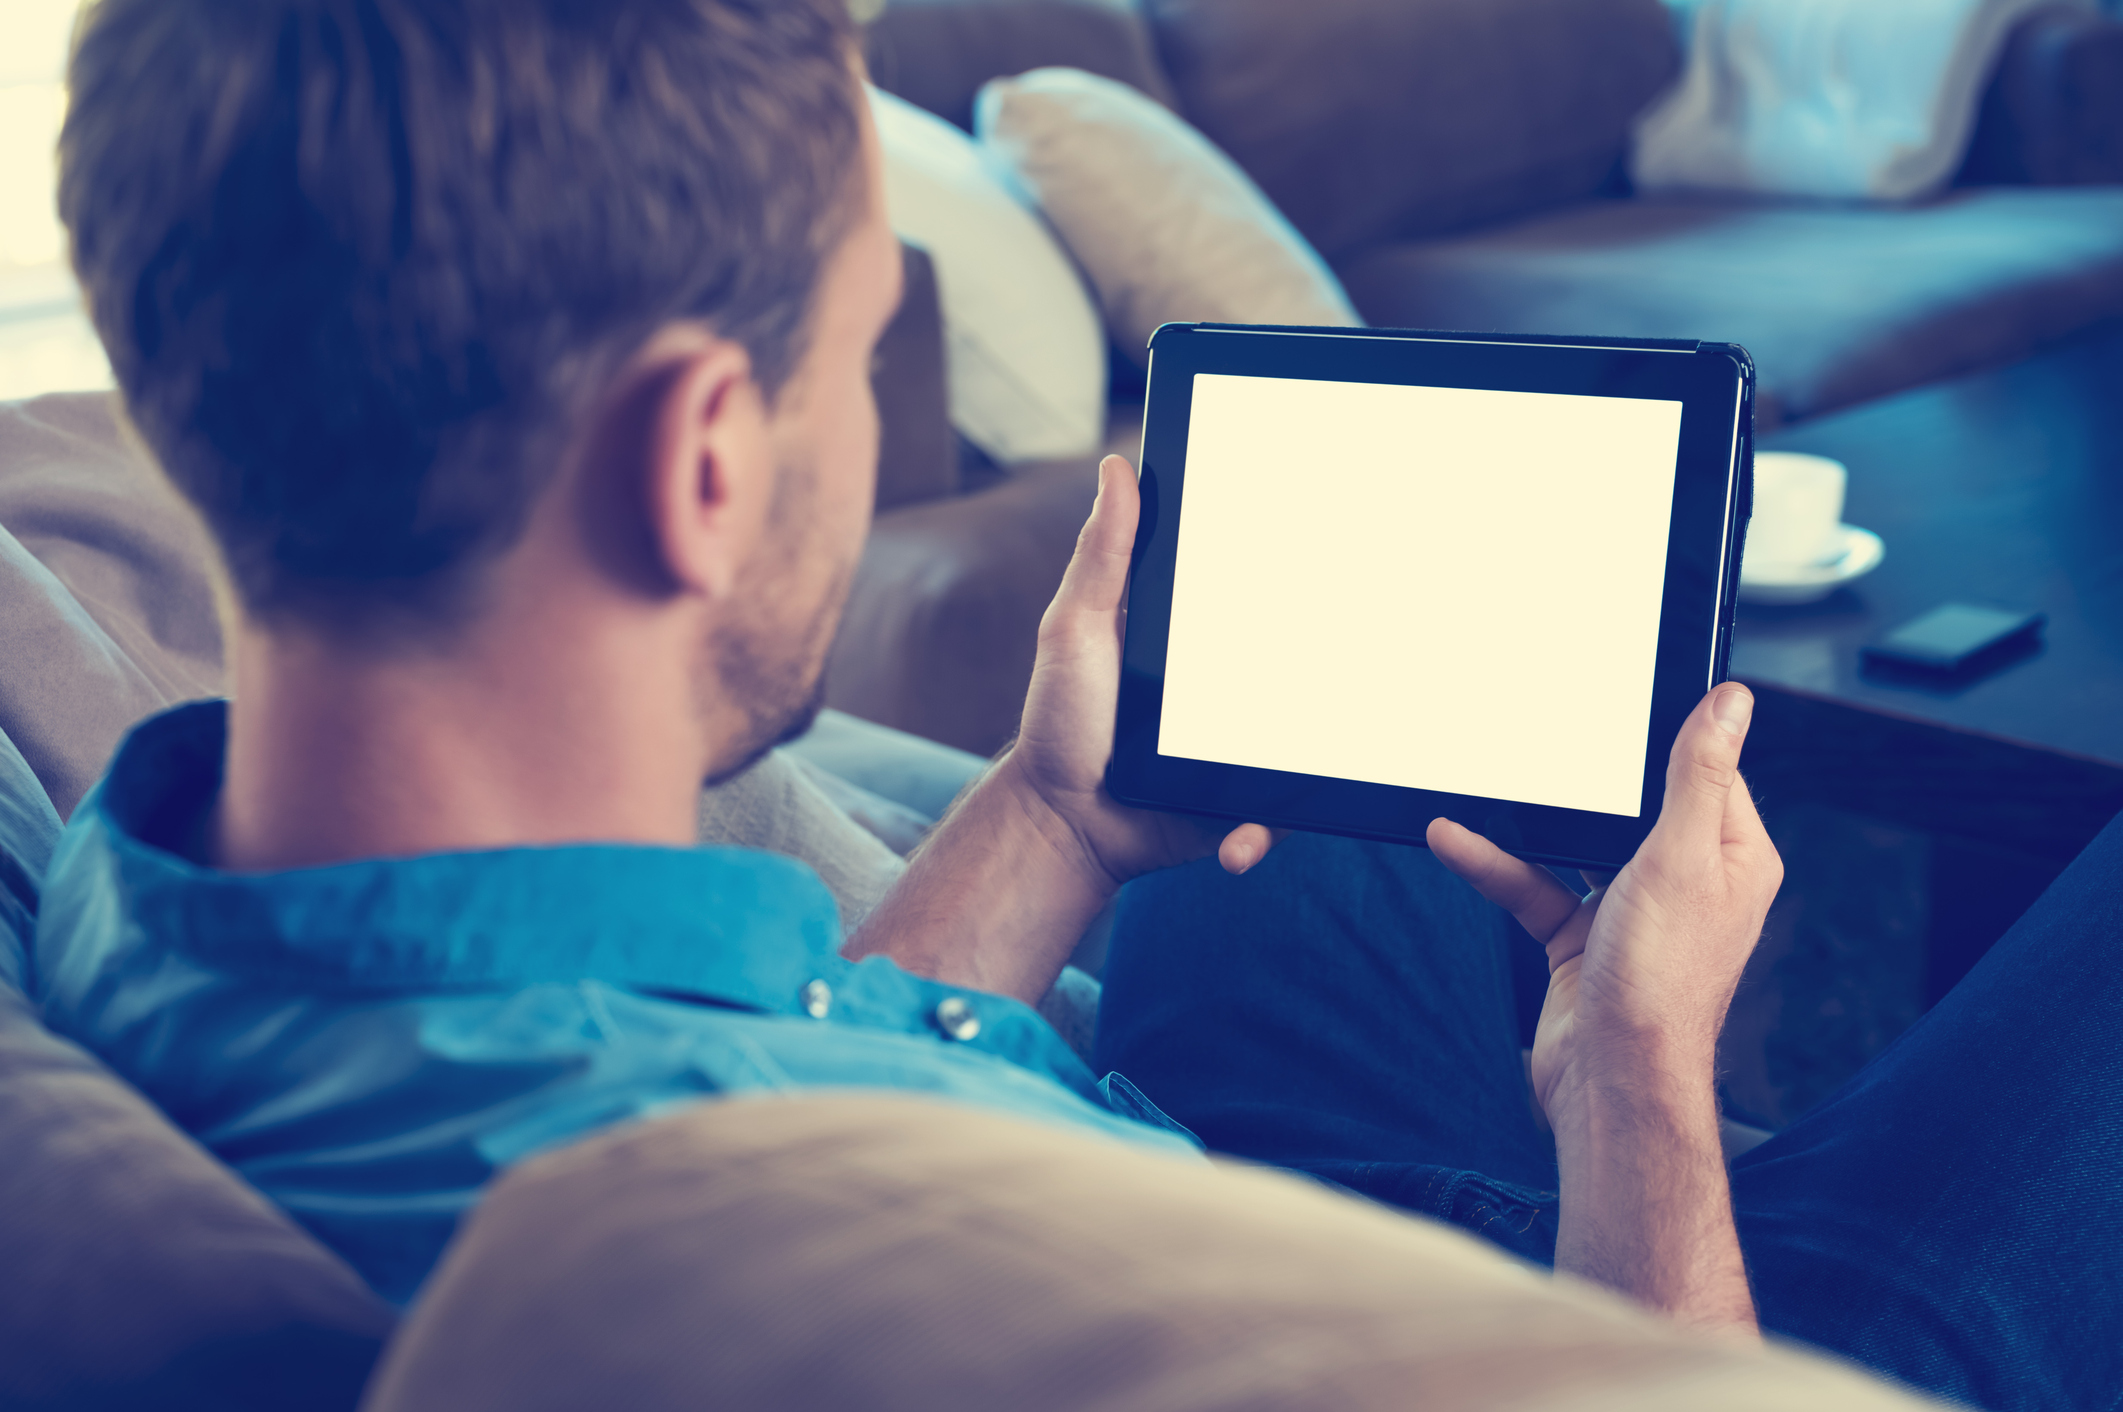 Brits Spend Almost Half Their Waking Life Looking at Screens